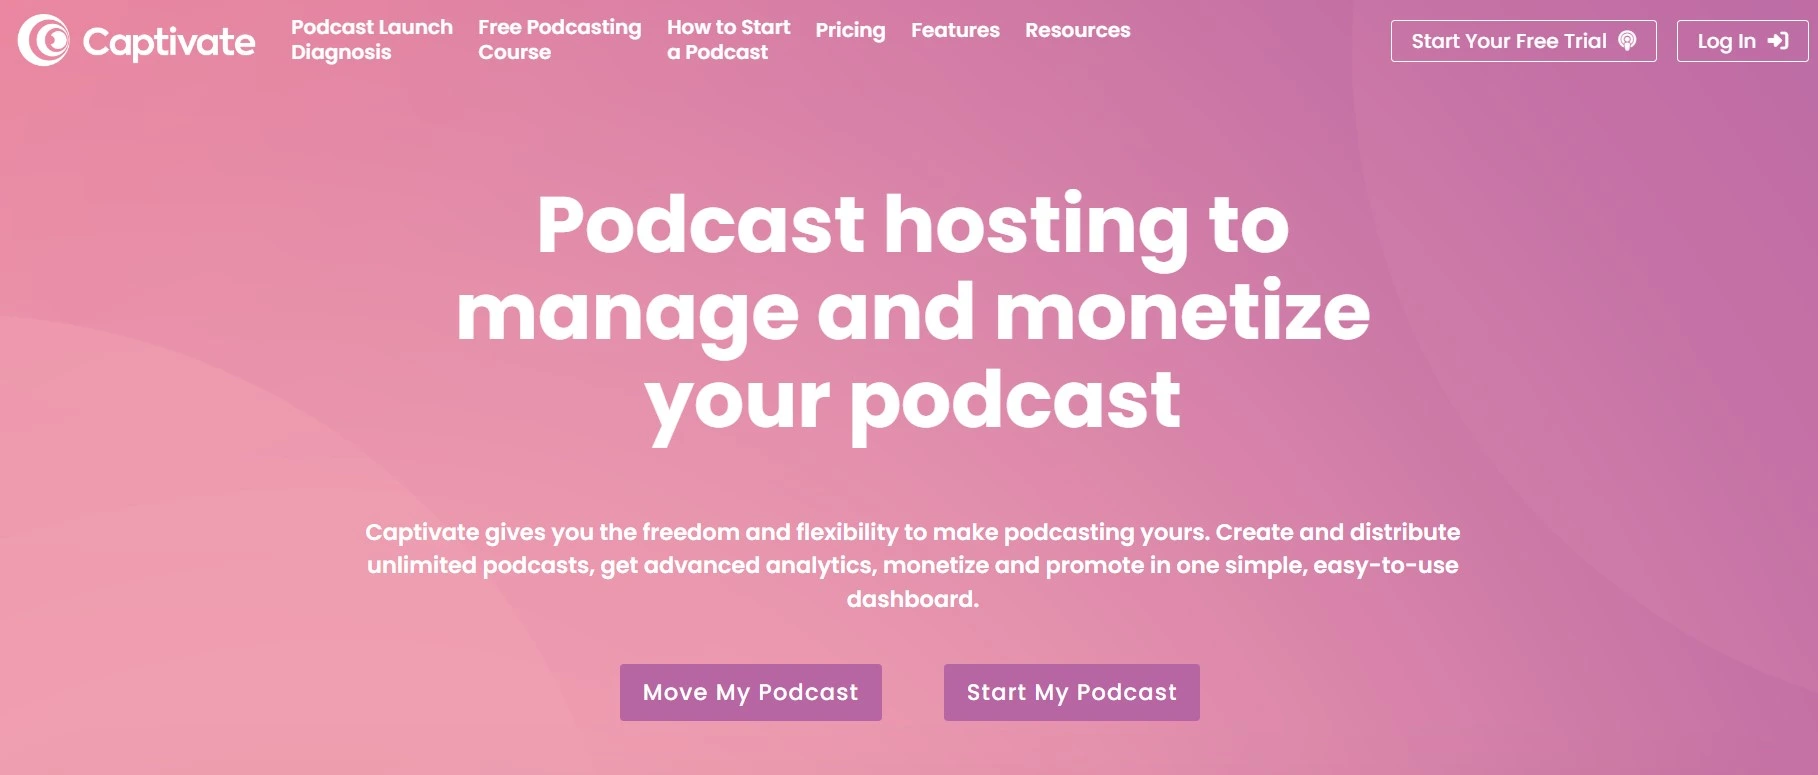 Captivate manage your podcast